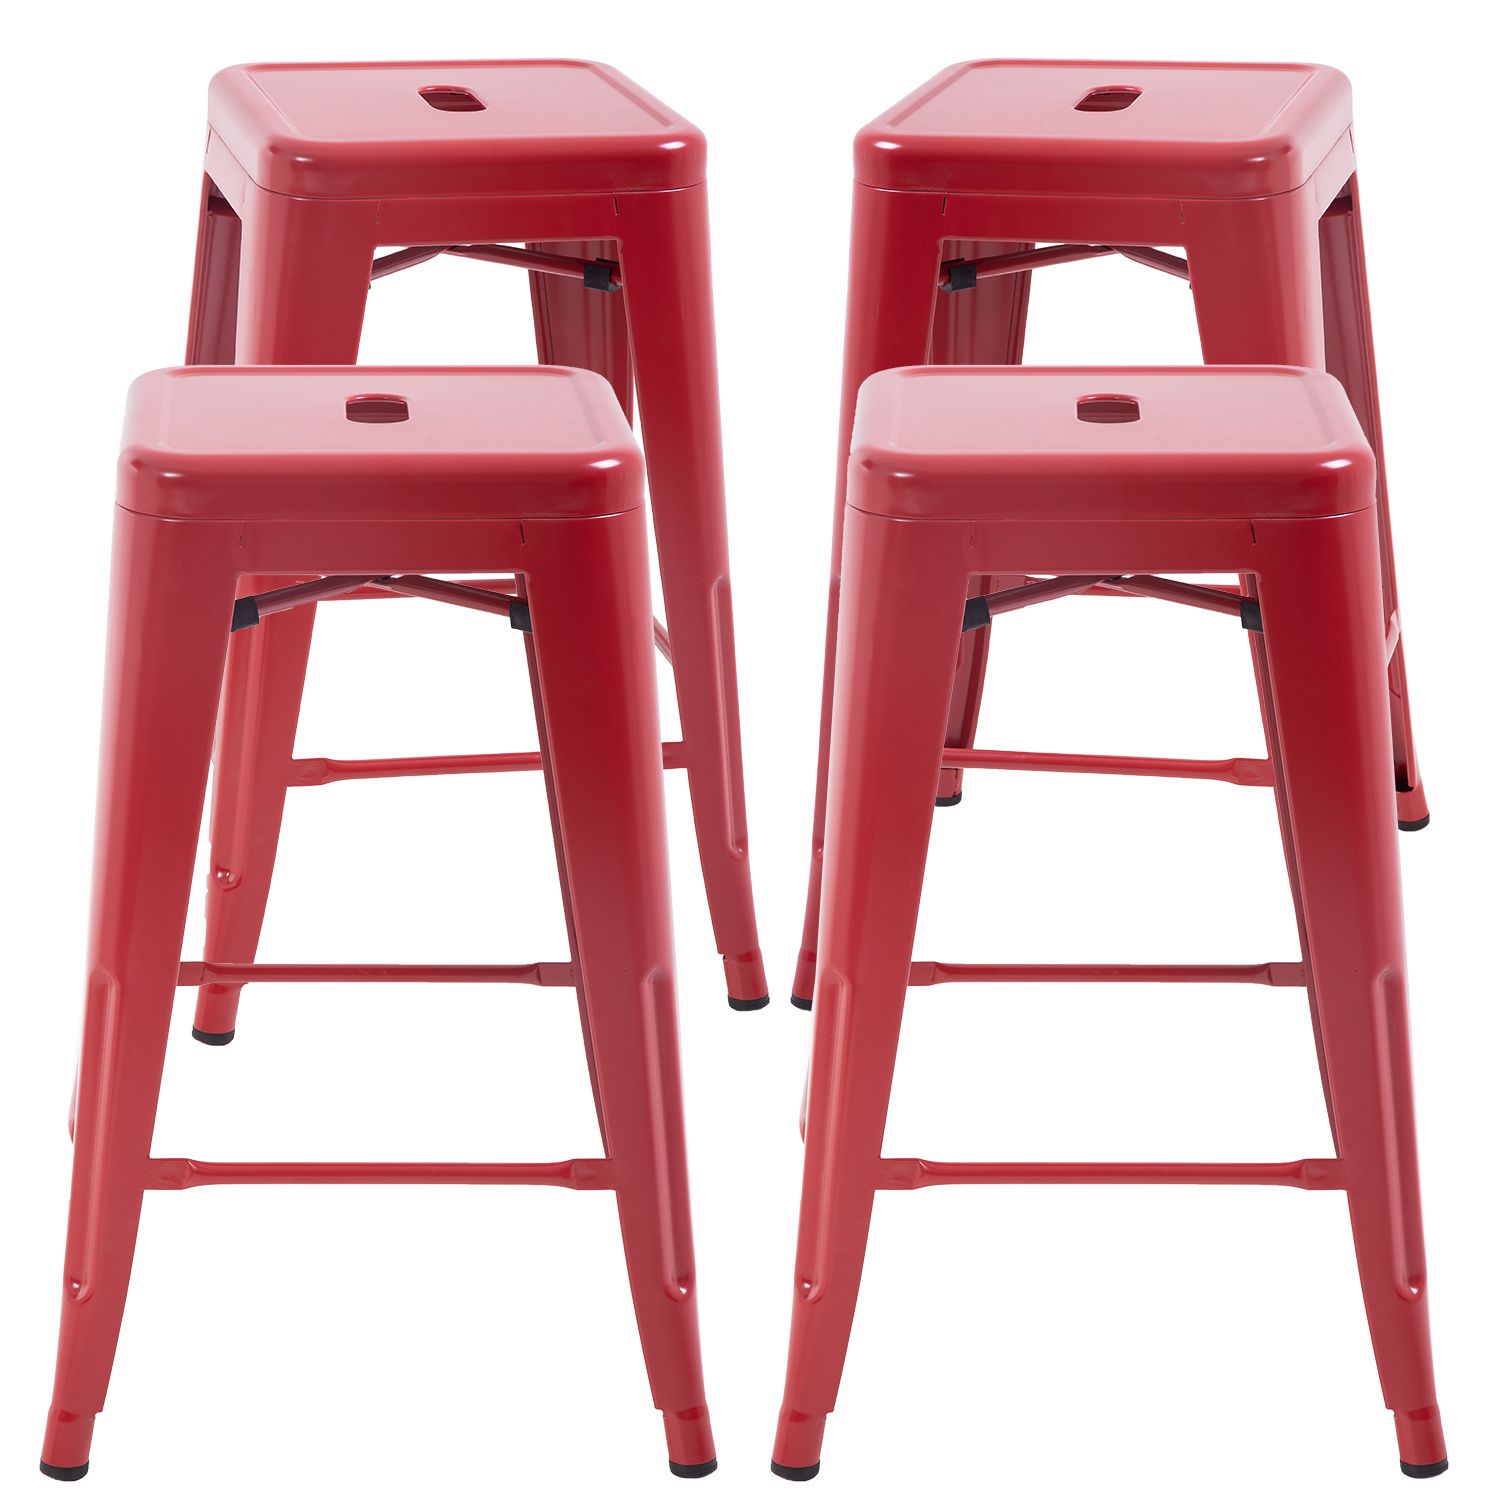 Counter Height Bar Stools Set Of 4 Metal Bar Stools 24 Inches Kitchen Pertaining To Bar Tables With 4 Counter Stools (View 13 of 15)